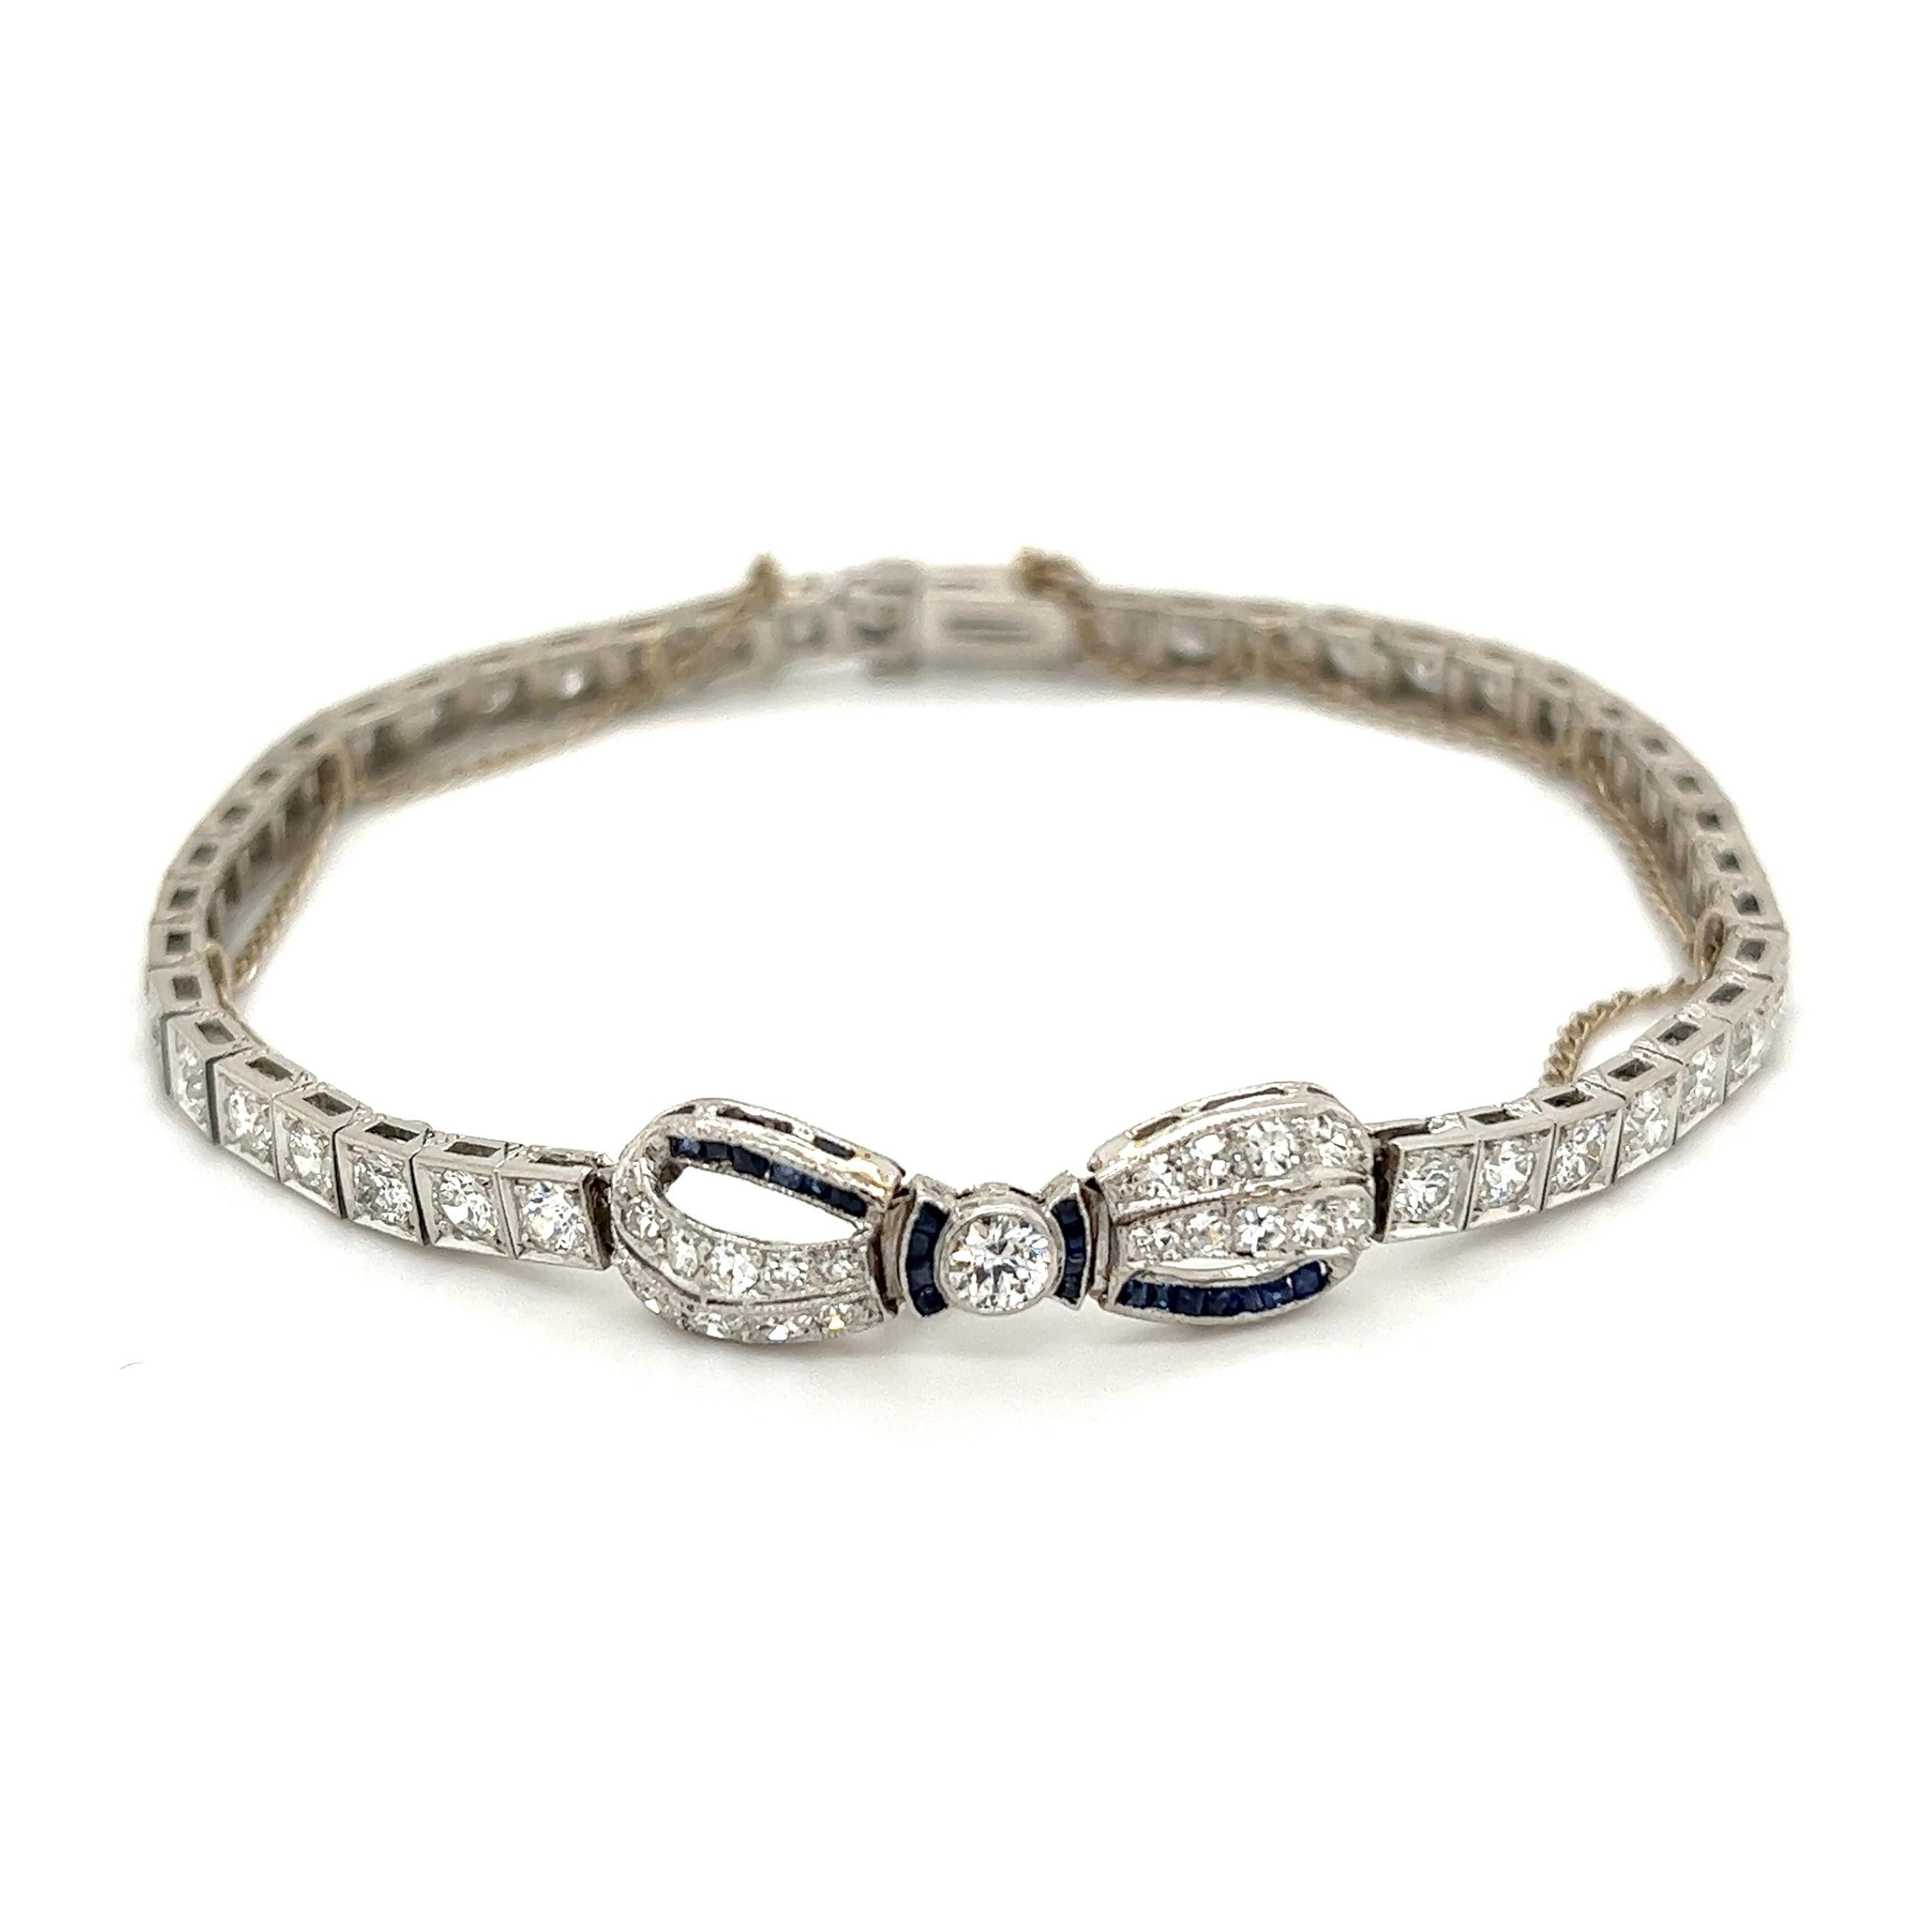 Simply Beautiful! Deluxe Fine Quality BLACK STARR & FROST Art Deco Diamond and Sapphire Platinum Bracelet, centering a Bow. Hand set with Diamonds, weighing approx. 5.25tcw and Blue Sapphires, approx. 0.30tcw. Measuring approx. 7.25